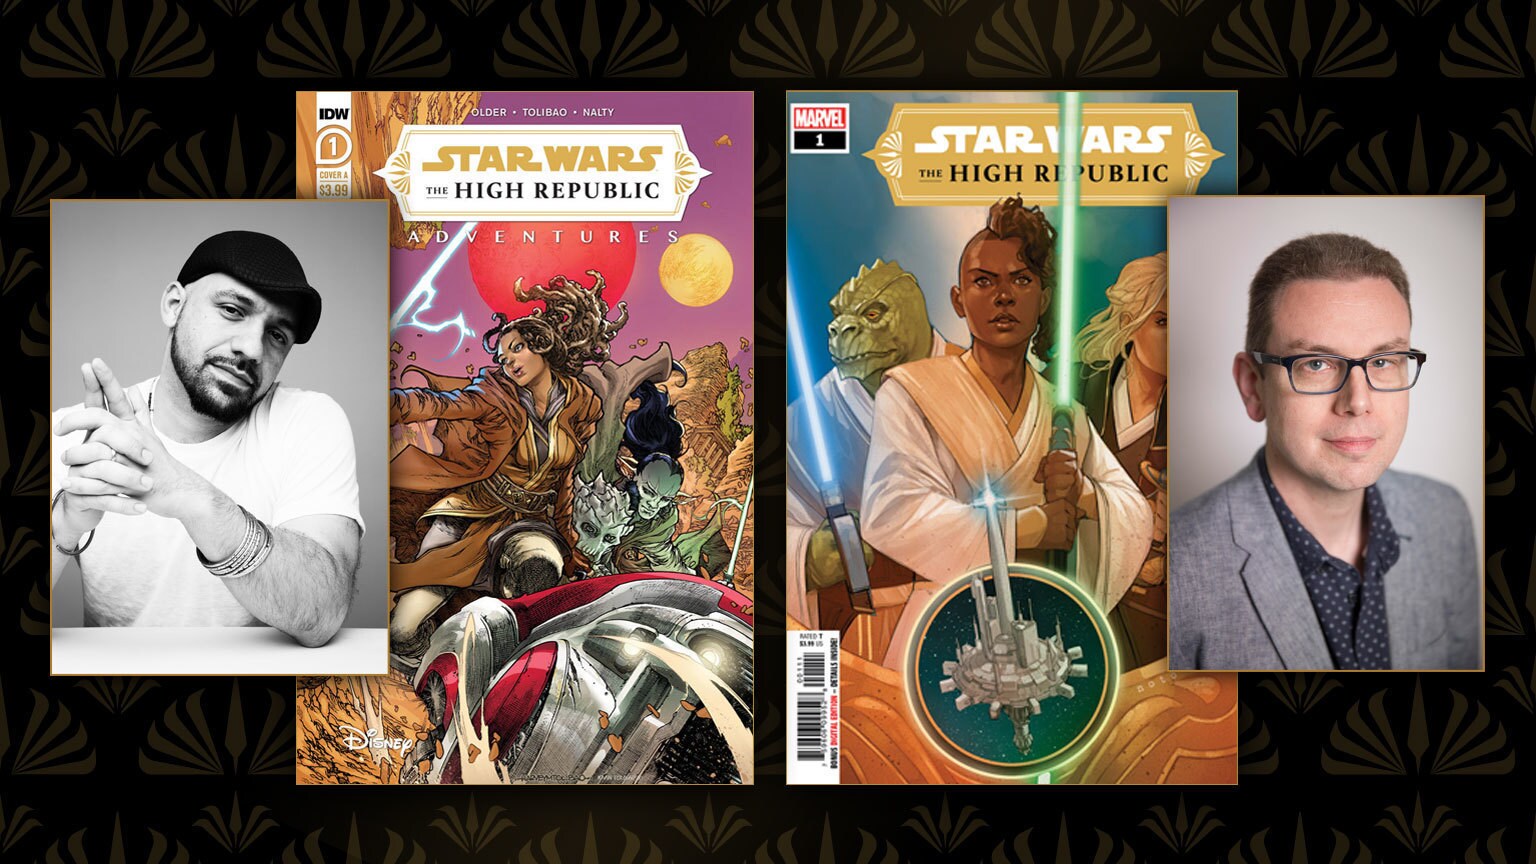 The Makers of Star Wars: The High Republic: Cavan Scott and Daniel José Older on Marvel's and IDW’s Comics